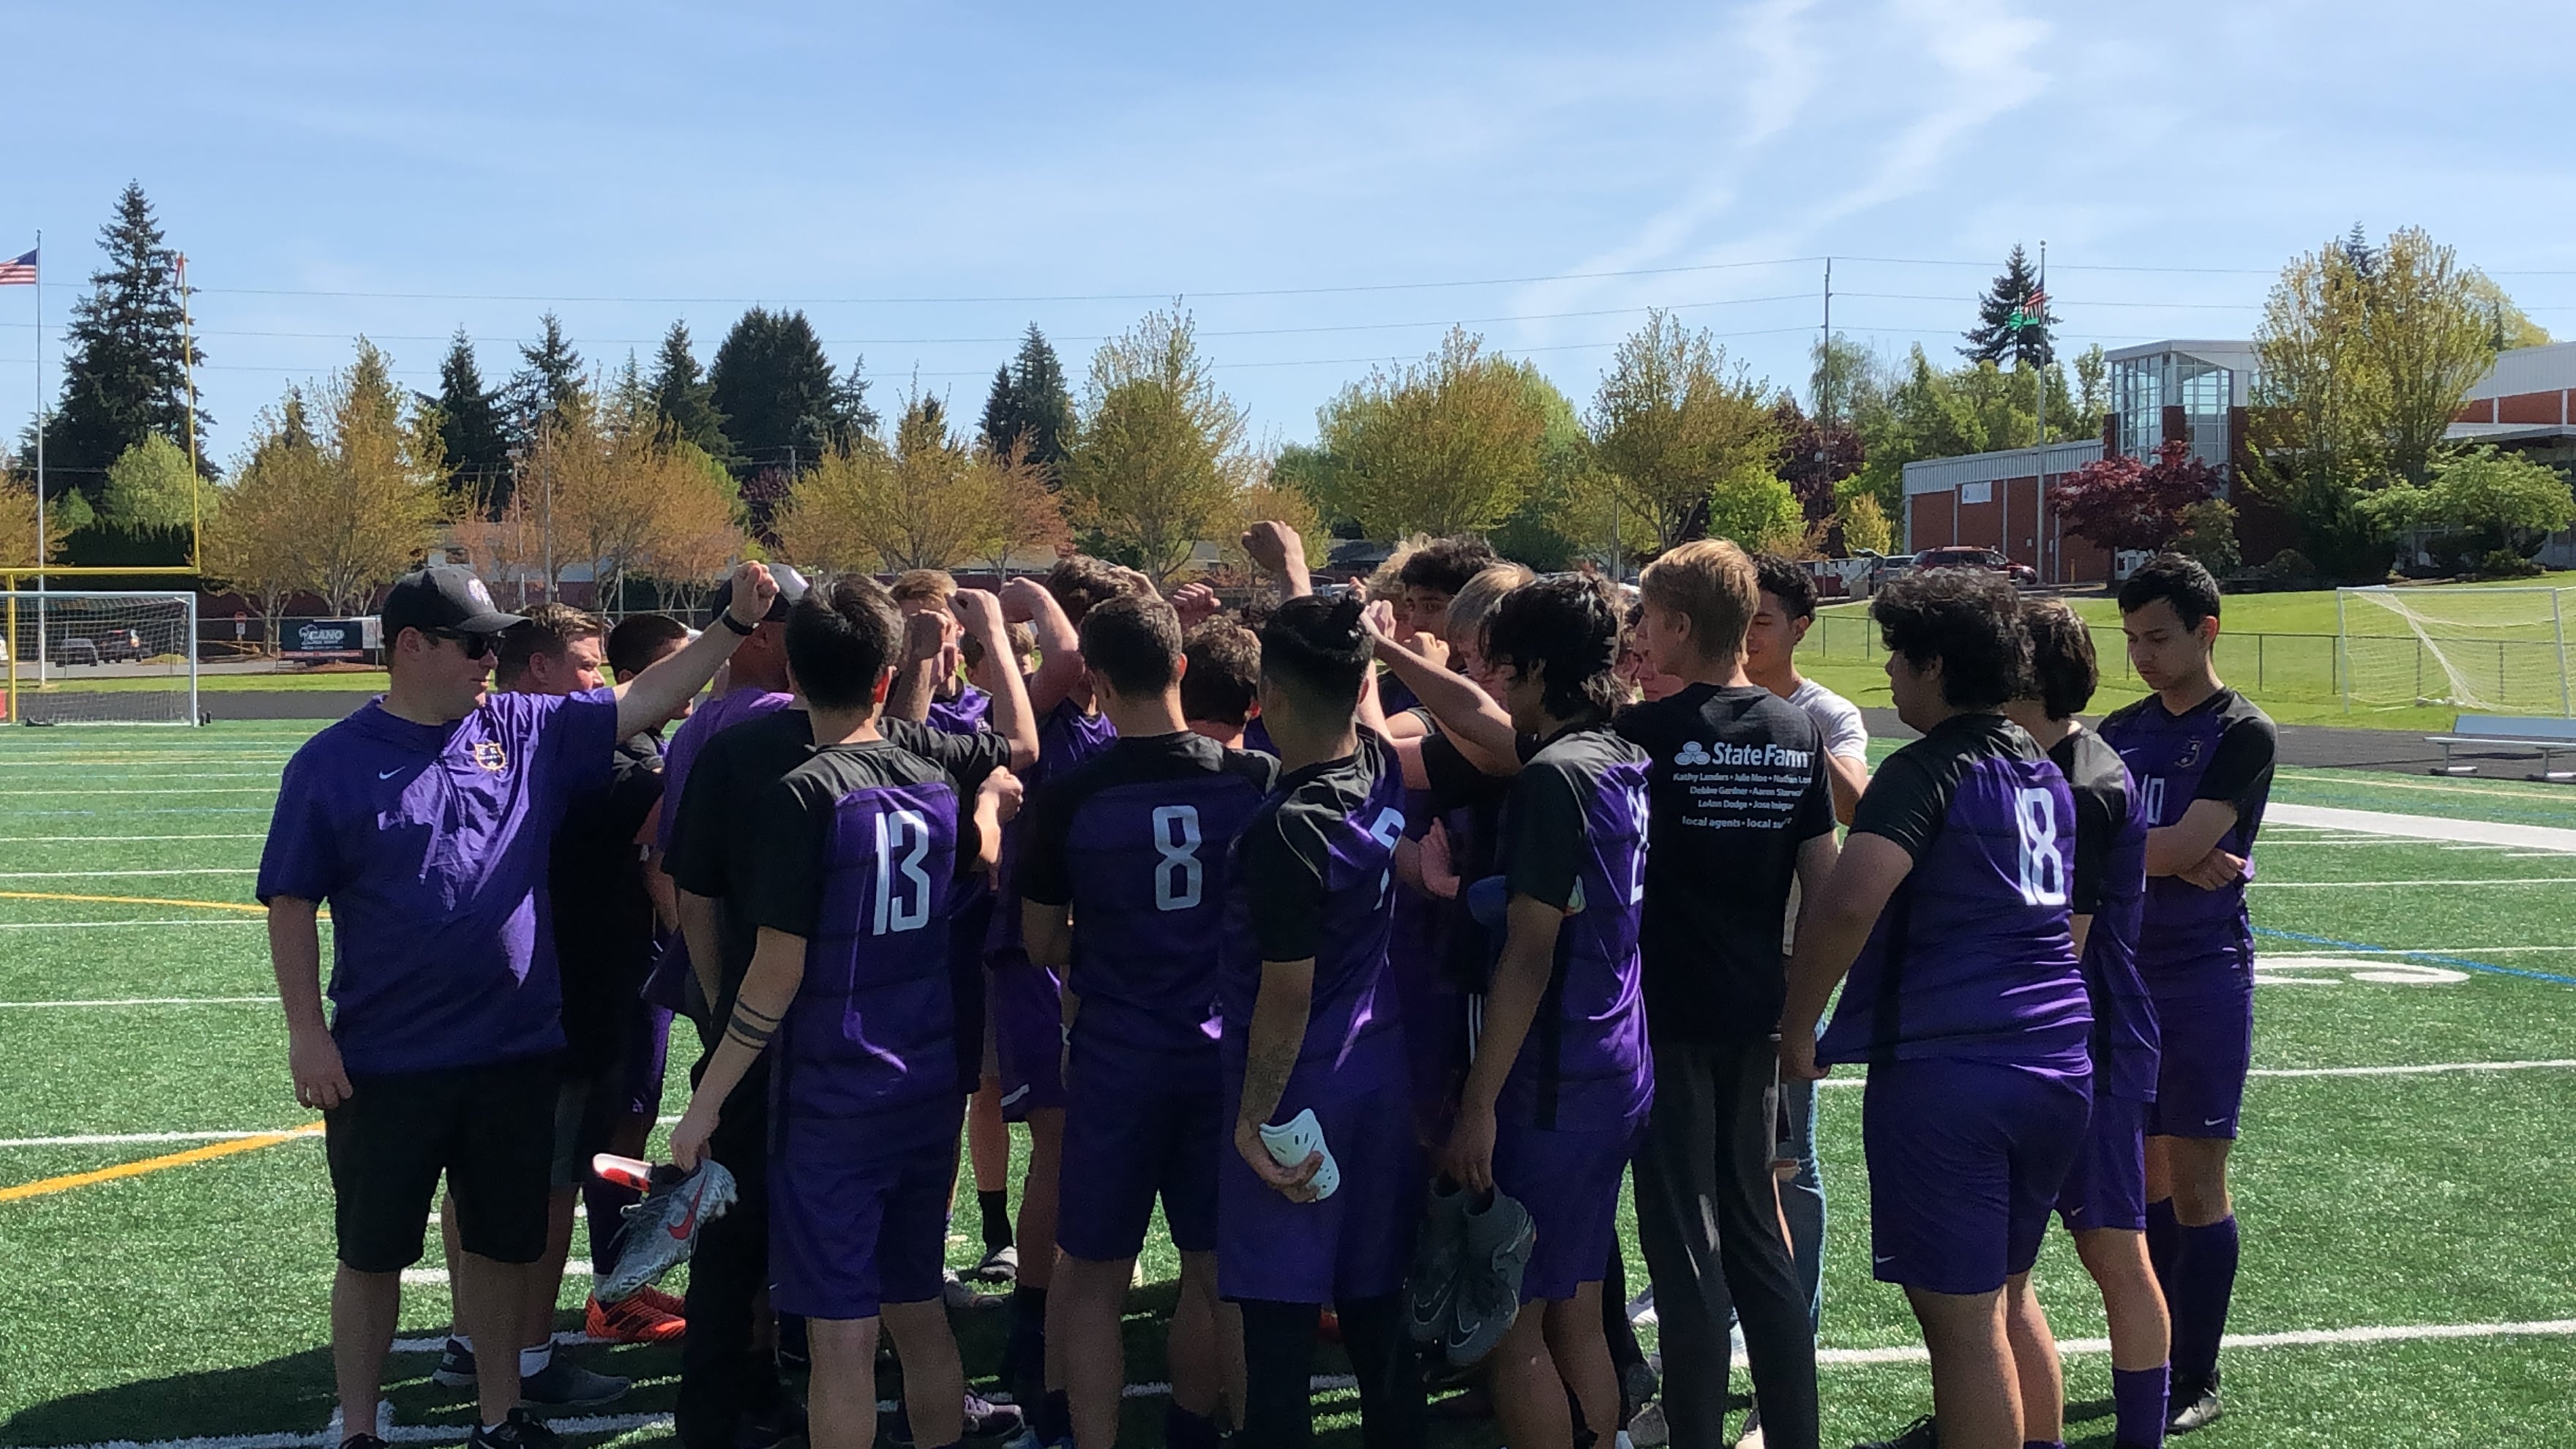 The Columbia River boys soccer team gathers after beating W.F. West 7-0 on Saturday in the first round of the 2A district tournament at Columbia River High.